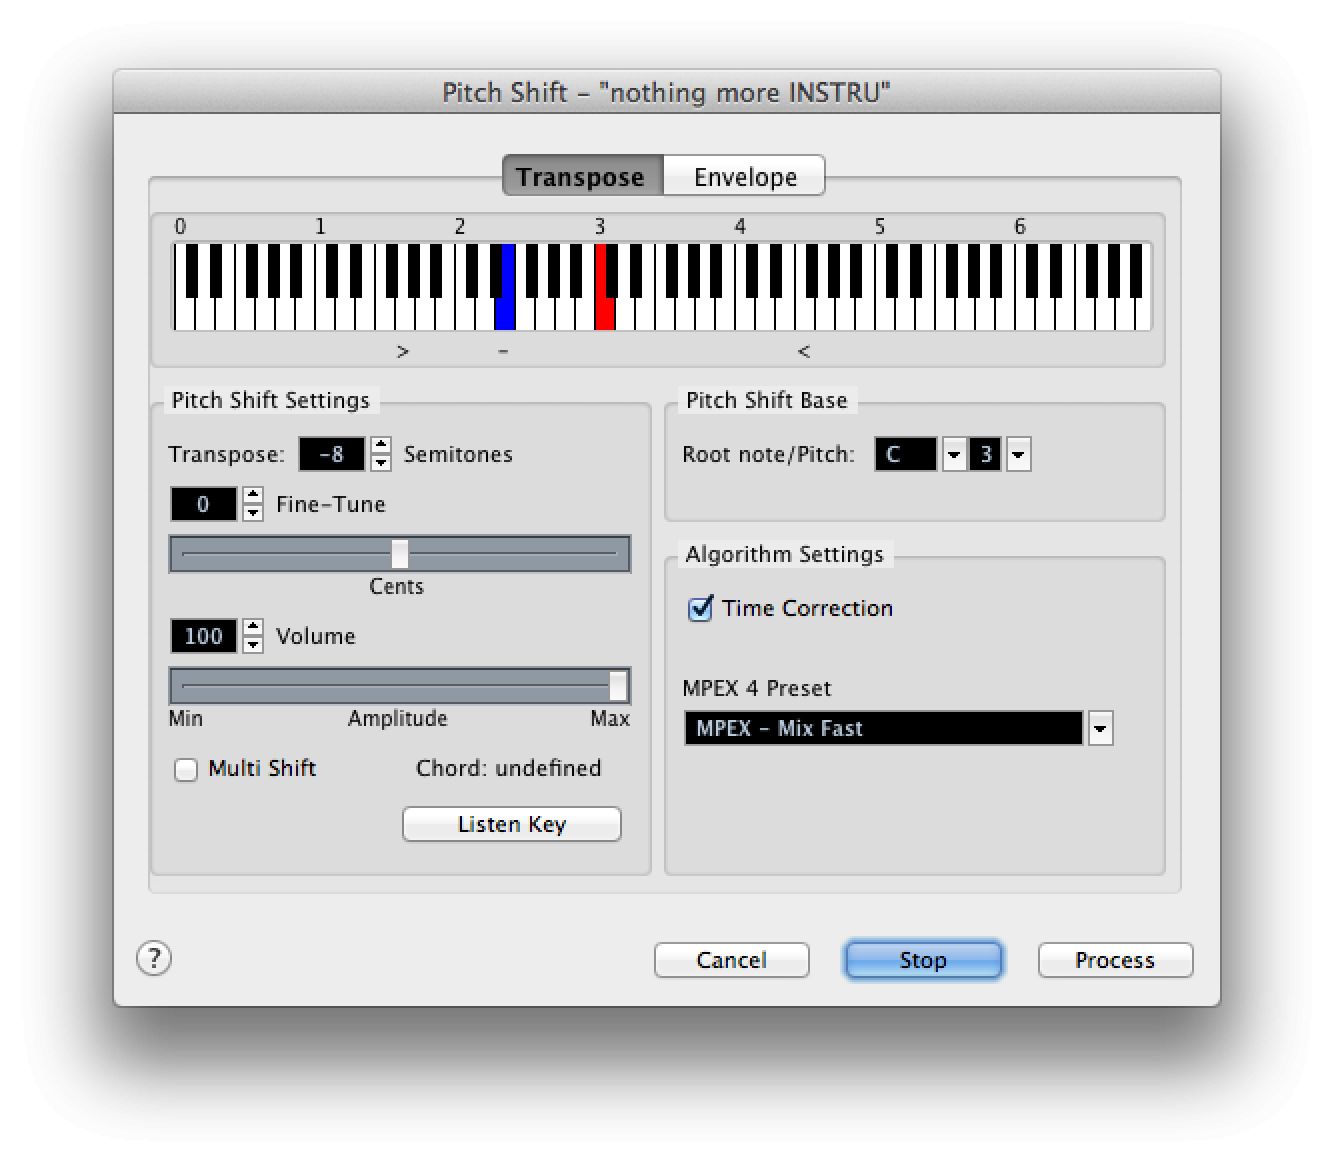 Get interesting results by pitch shifting your audio without affecting the tempo.